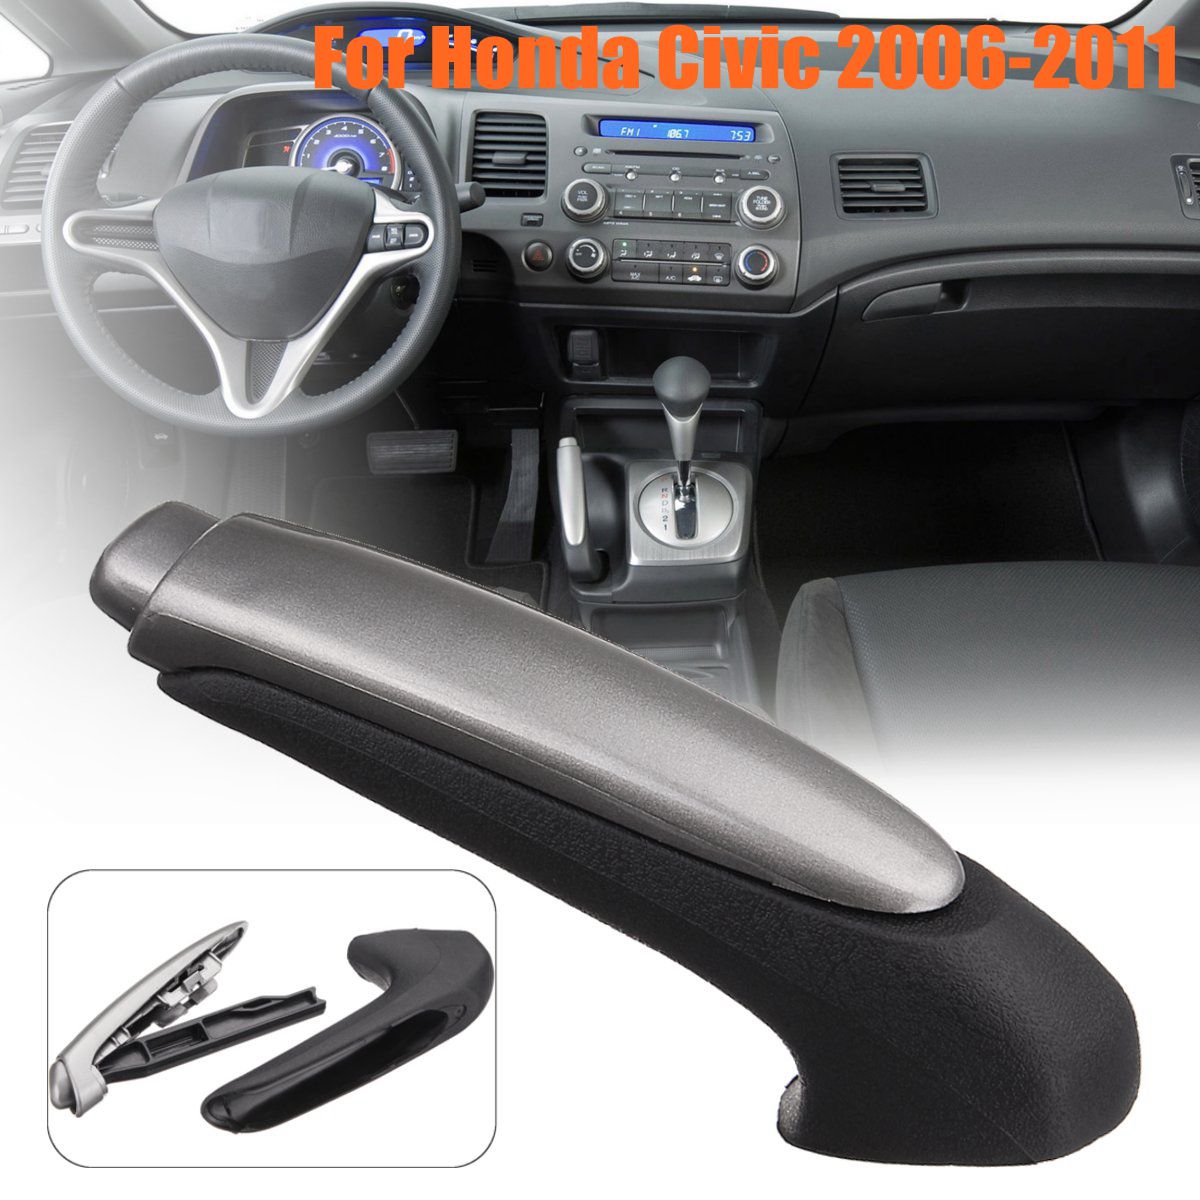 BAGUIO STORE Handle Cover Emergency Car Interior Parking Hand Brake Handle Lever Grip Cover For Honda for Civic 2006-2011